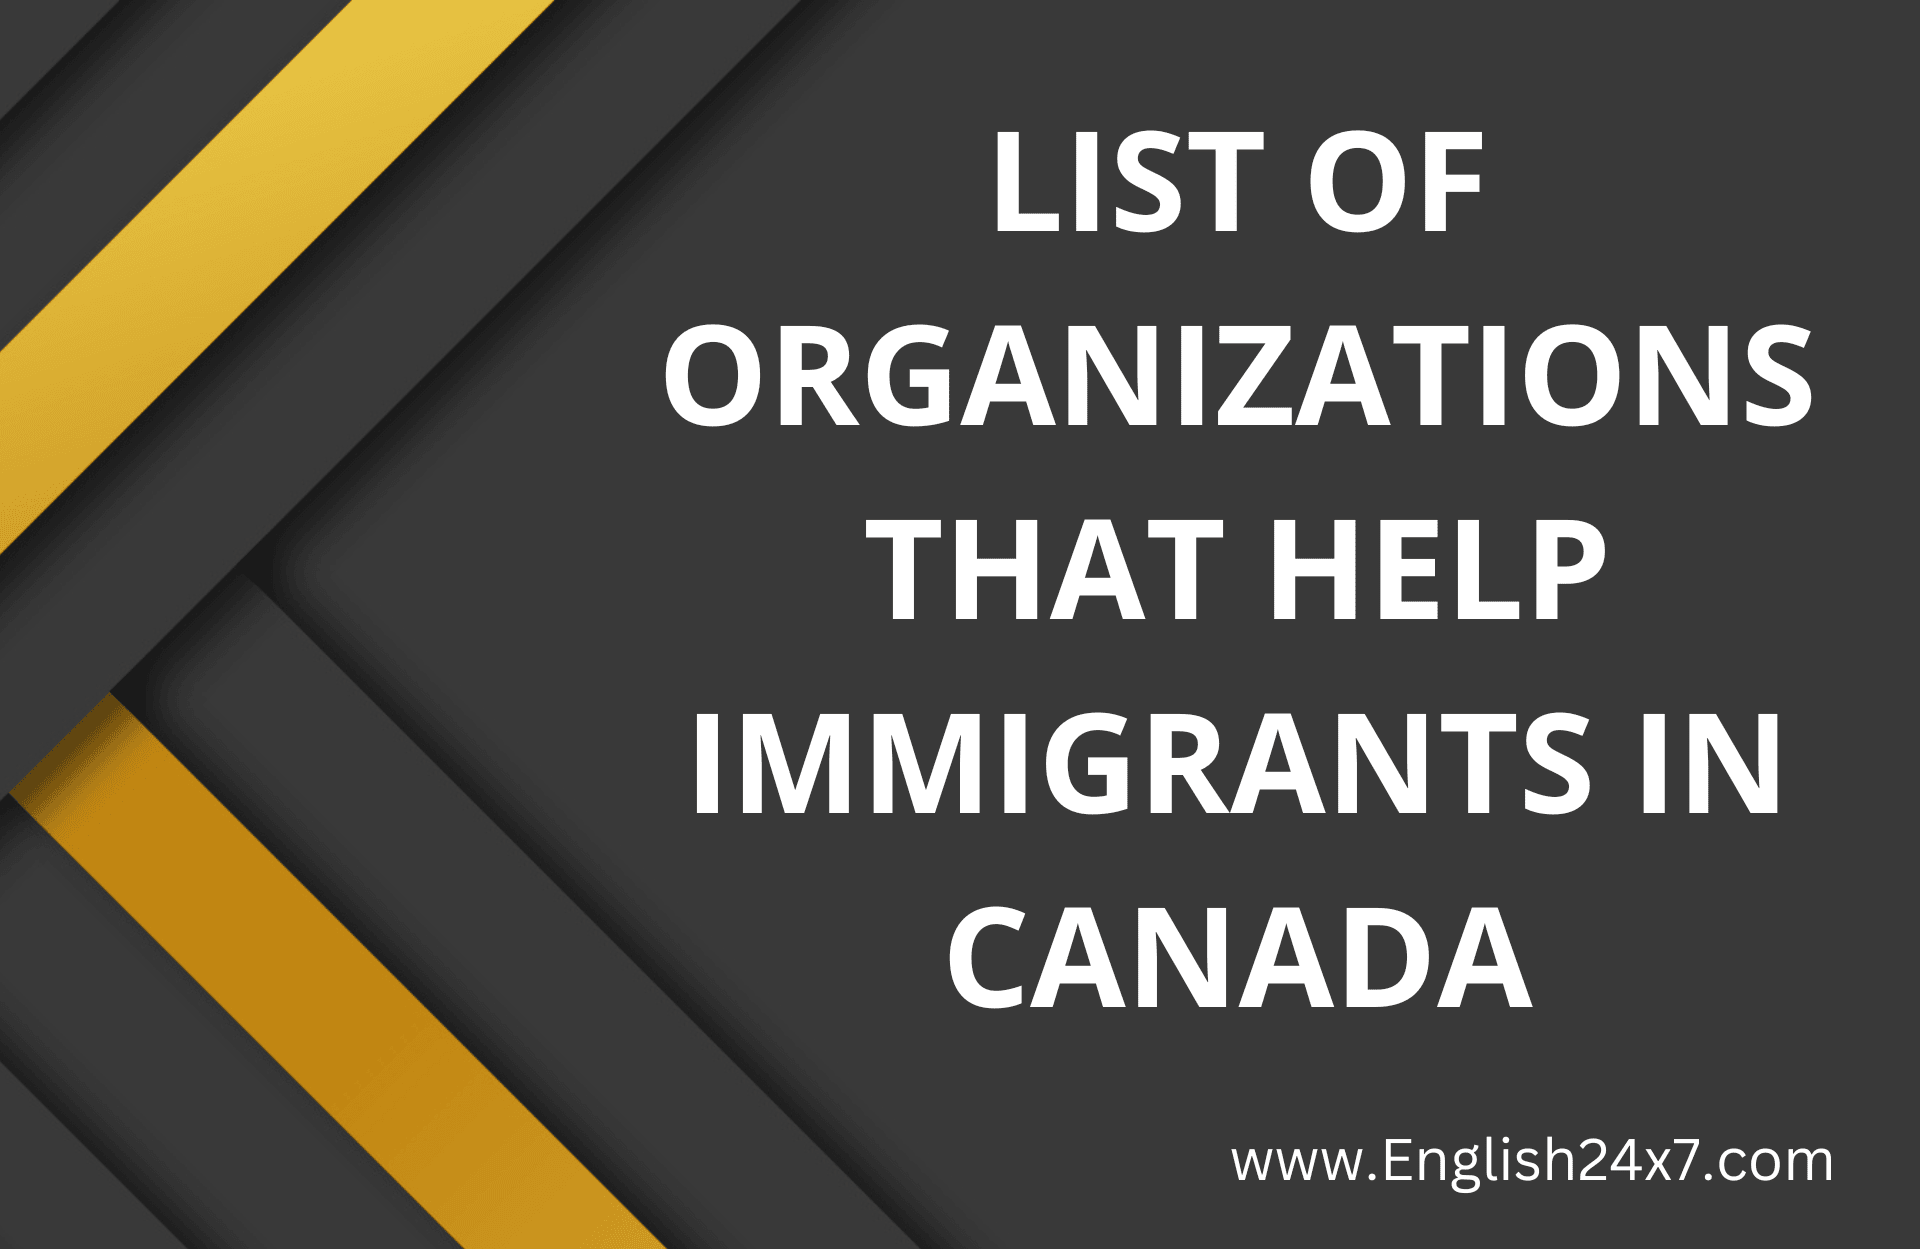 List of Organizations that Help Immigrants in Canada